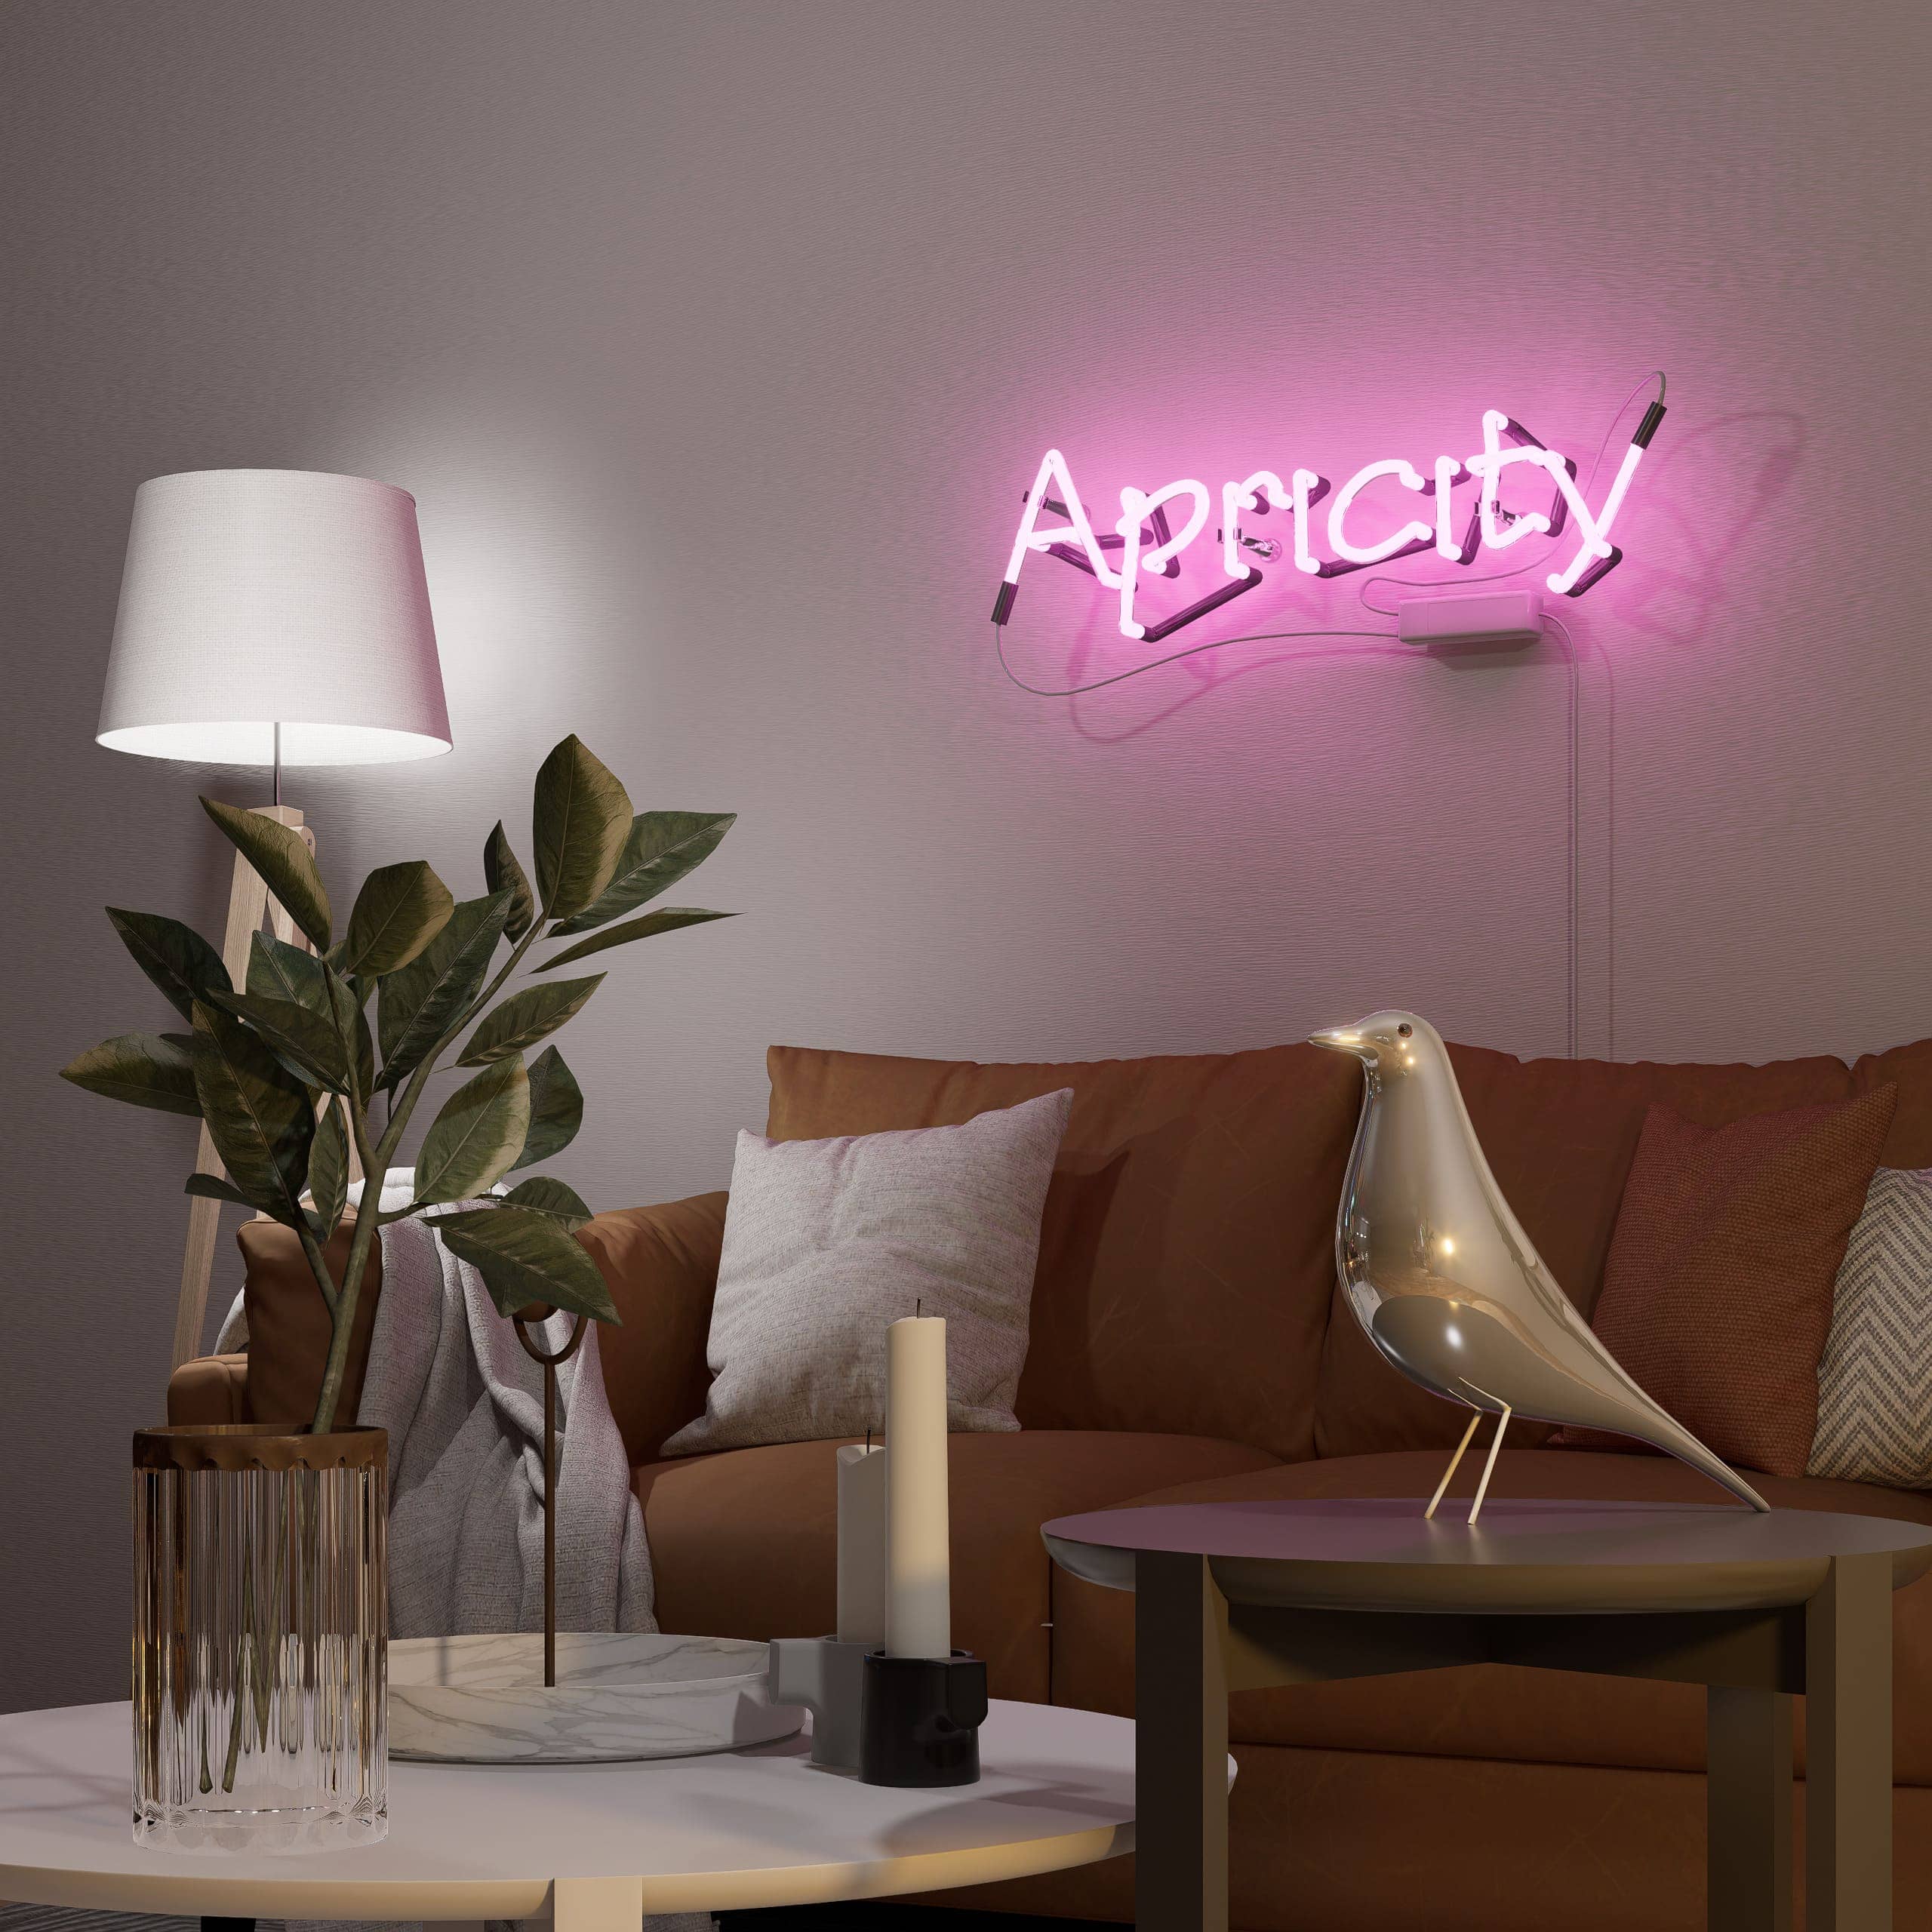 vintage-neon-signs-illuminate-the-beauty-of-'apricity'